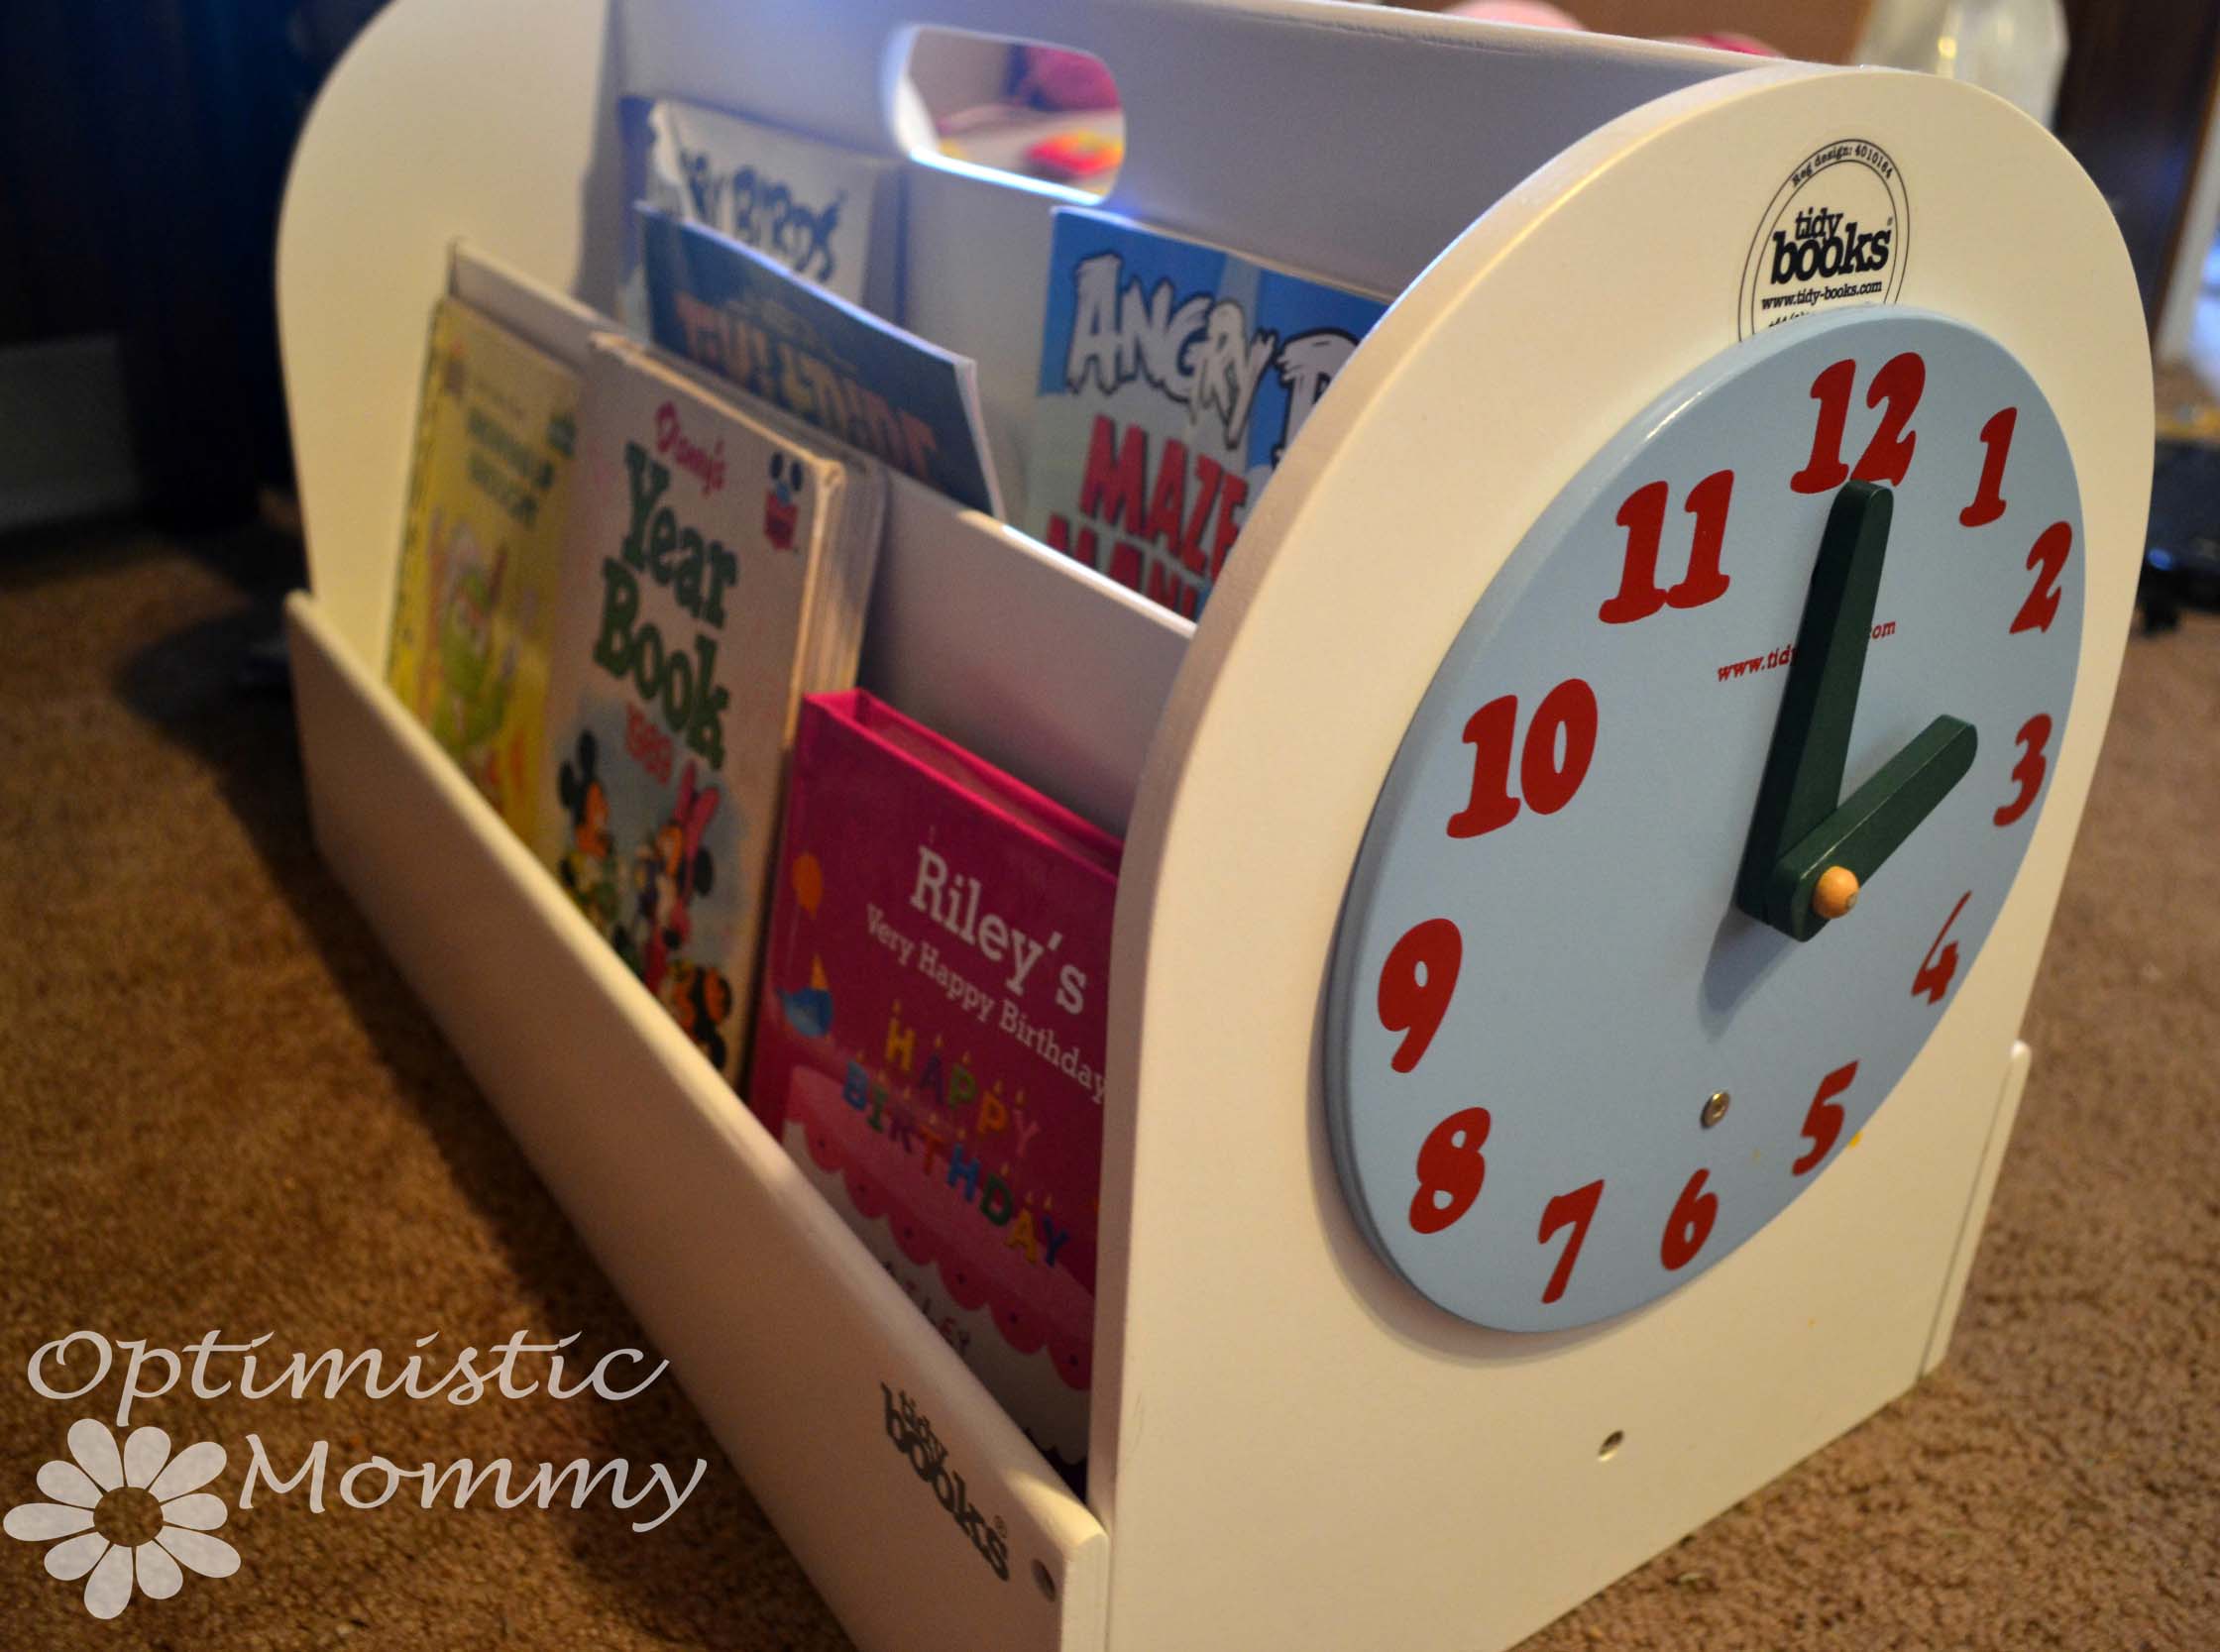 Tidy Books Box Review & Giveaway | Optimistic Mommy